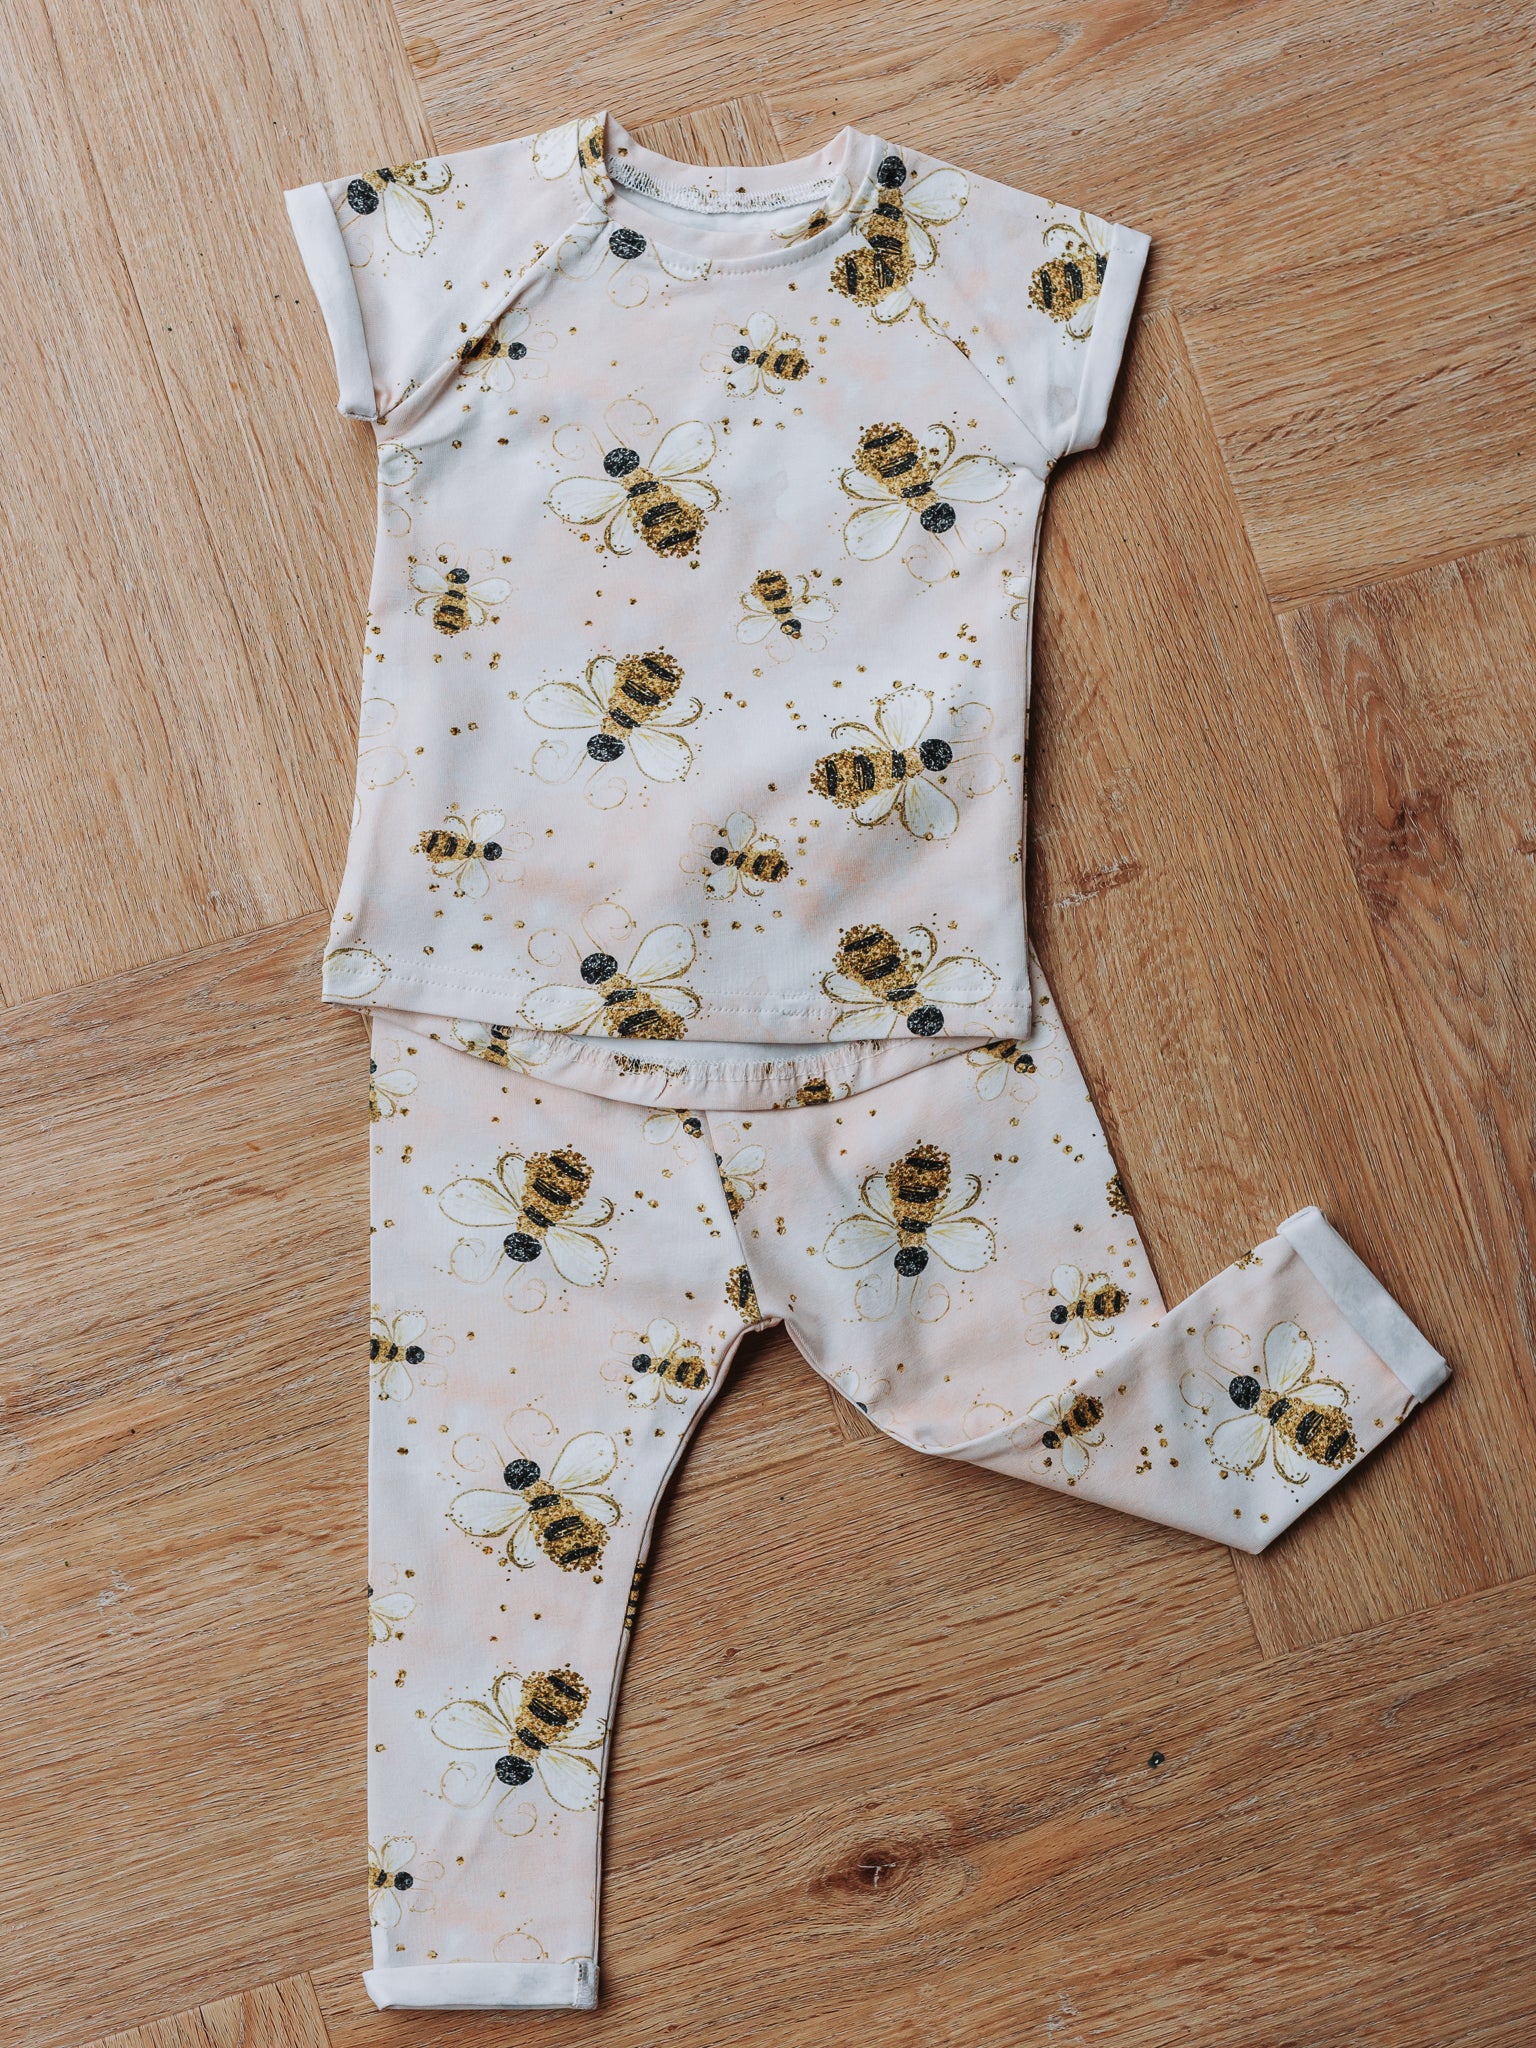 Bumble Bee Outfit Bundle